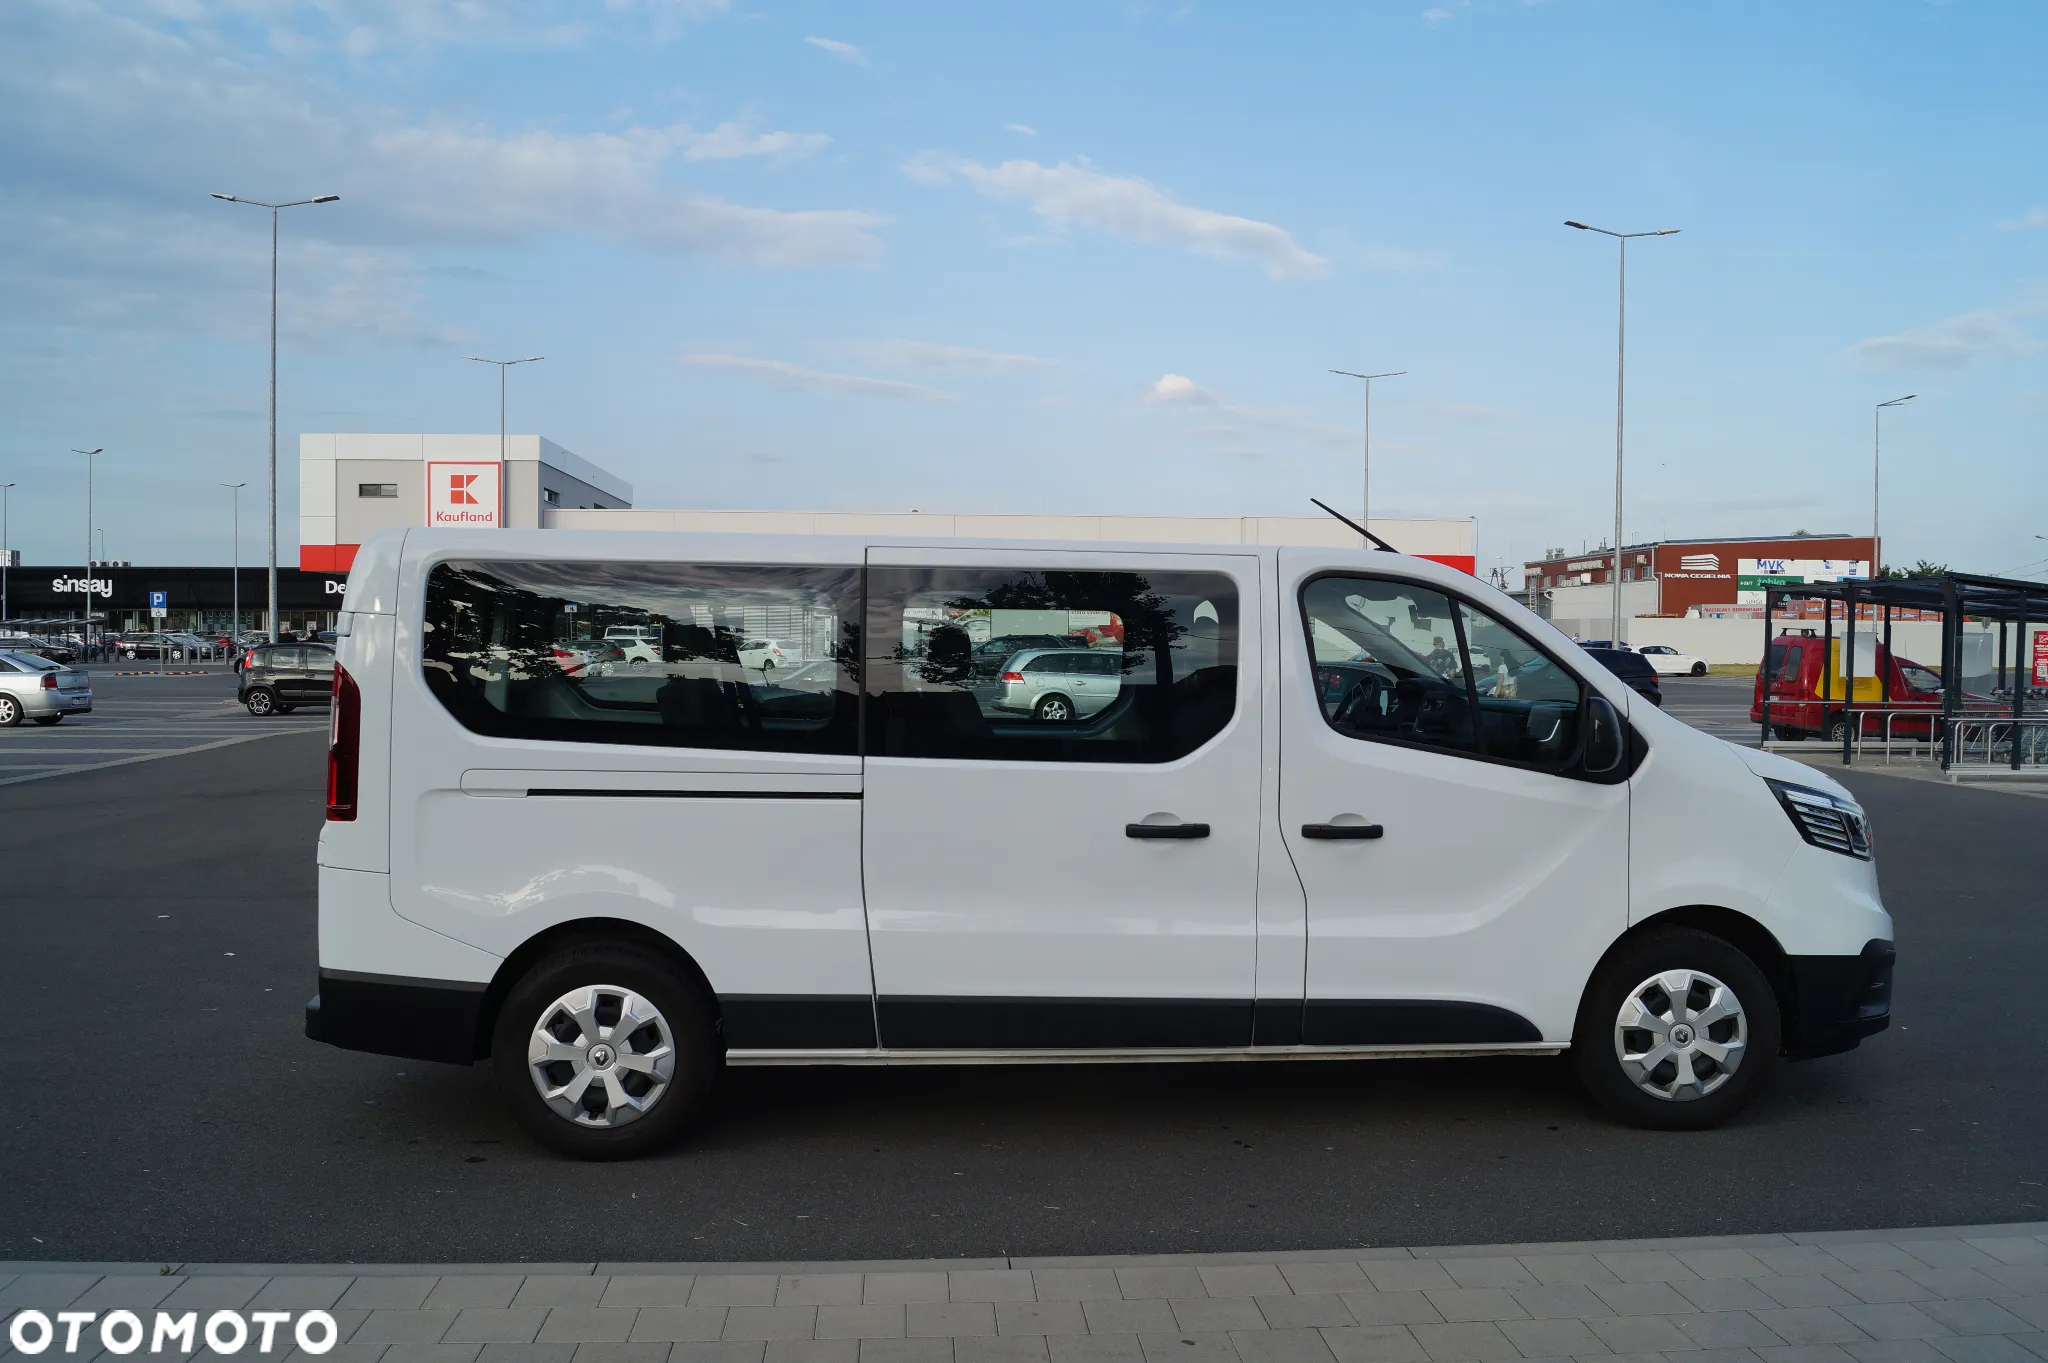 Renault Trafic SpaceClass 2.0 dCi - 5